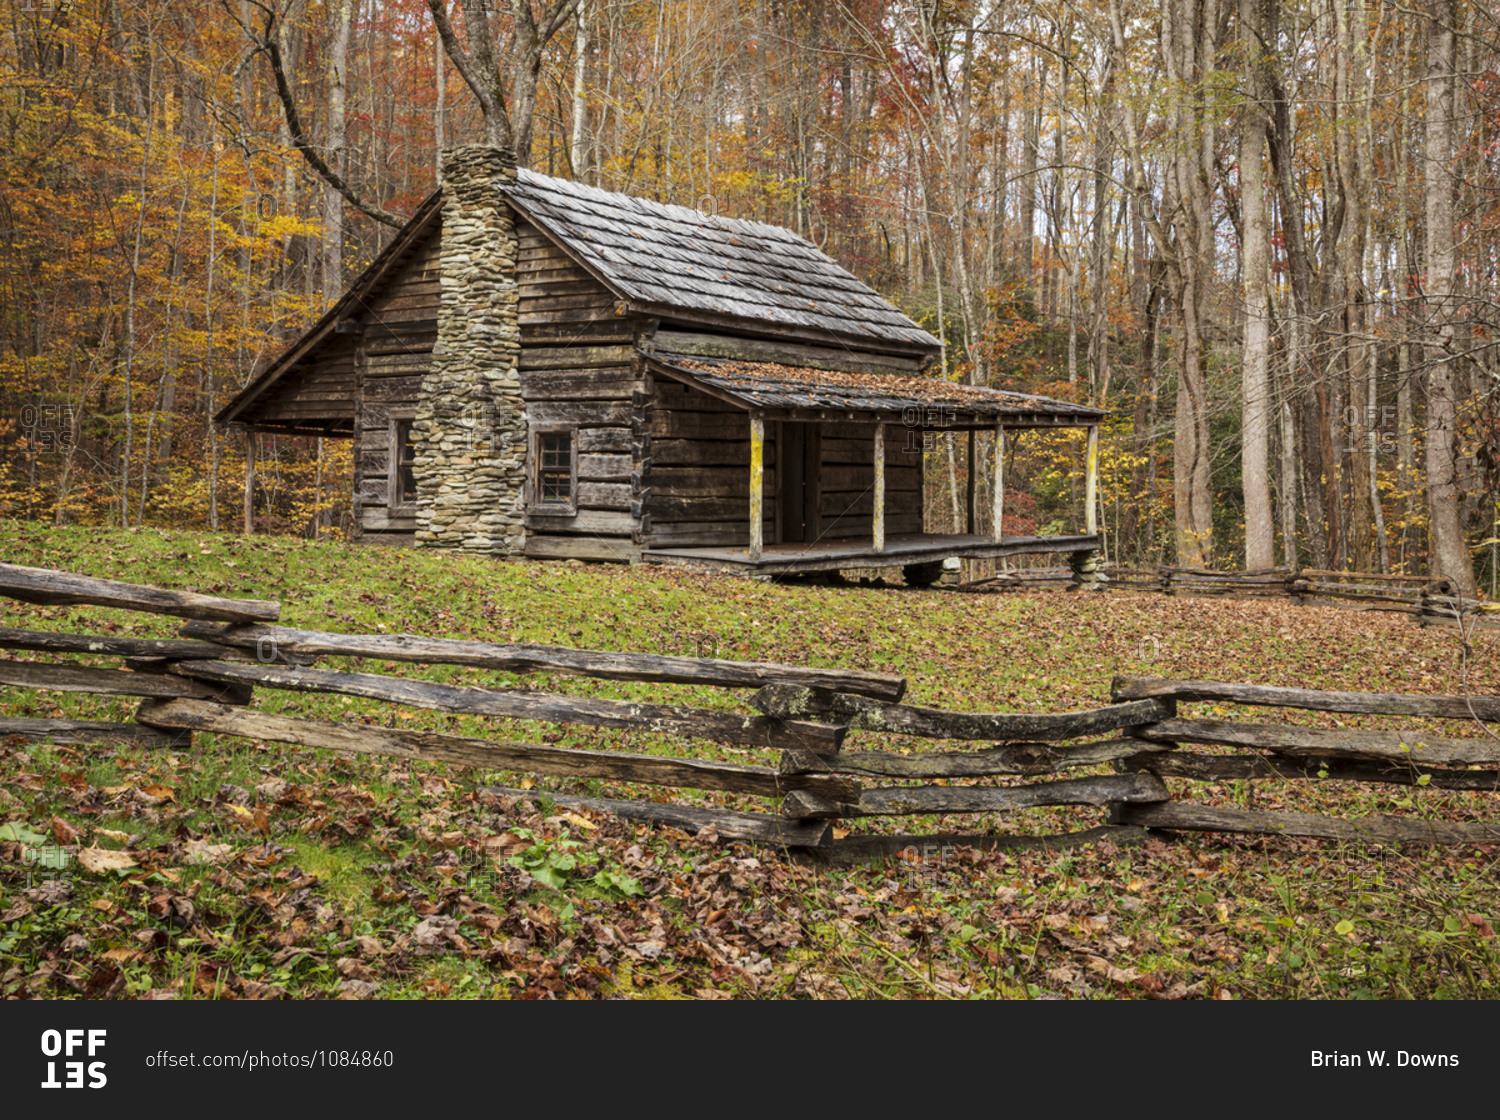 Old wooden cabin in an autumn forest in Great Smoky Mountains National Park, Cataloochee, North Carolina